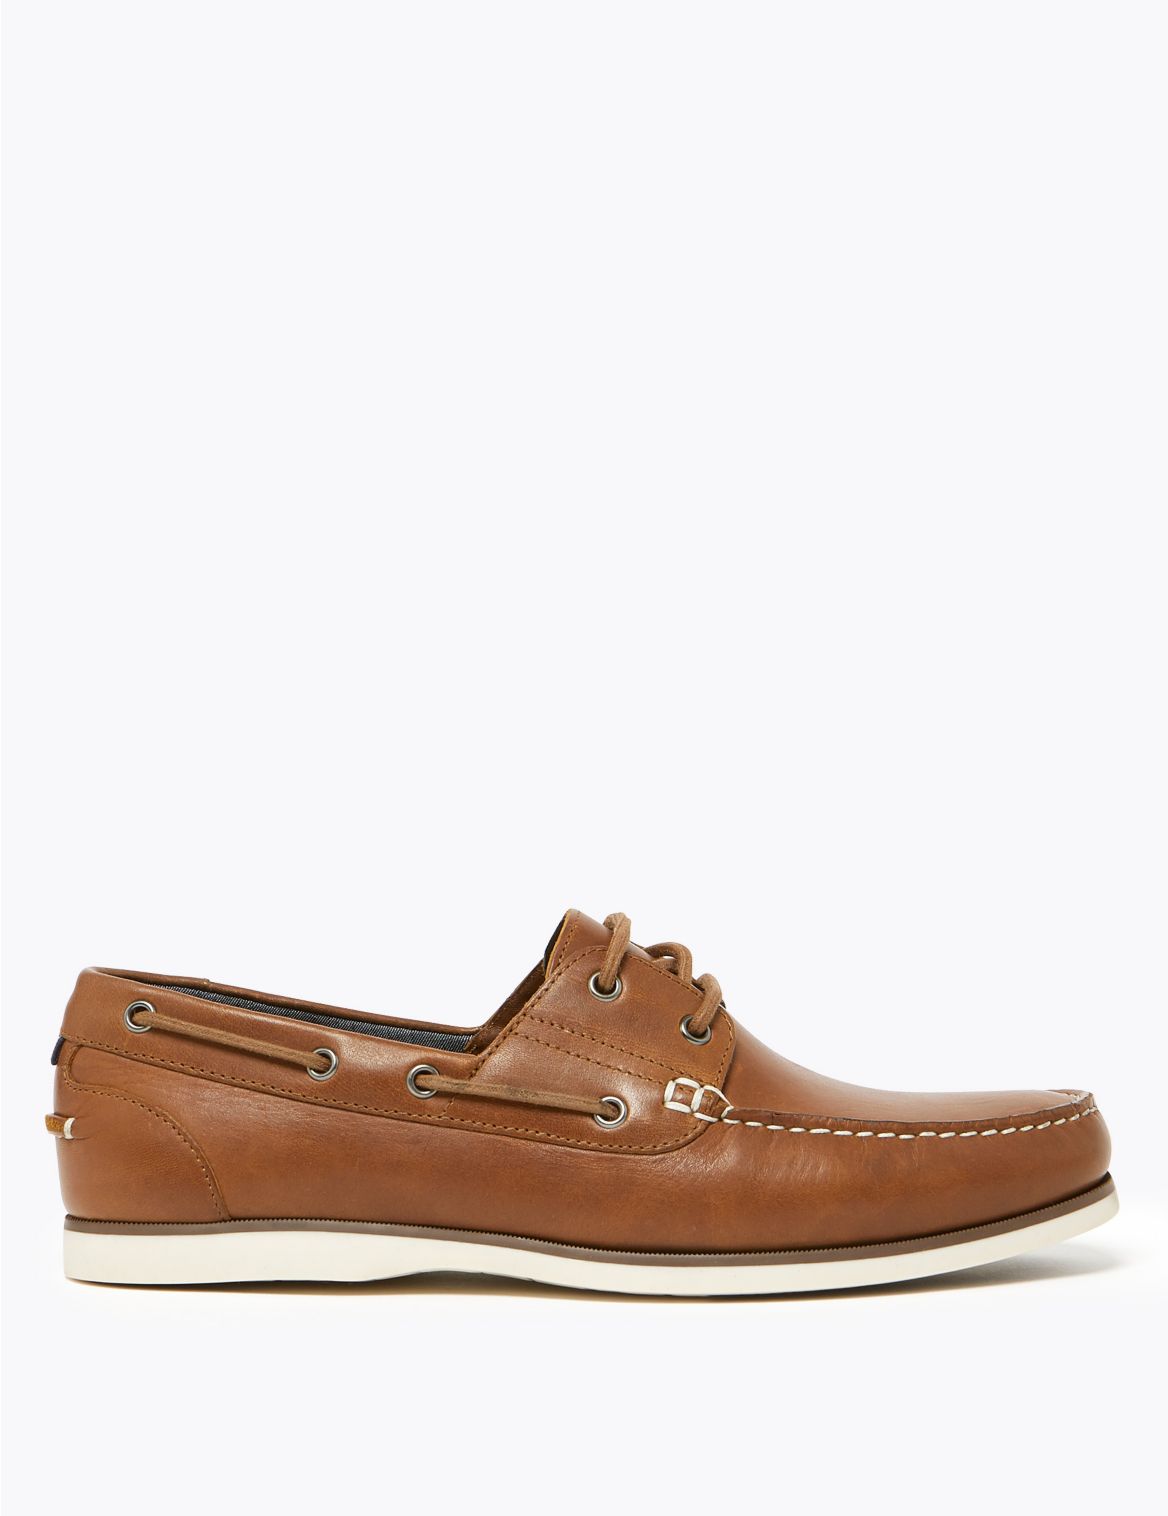 Leather Boat Shoes brown